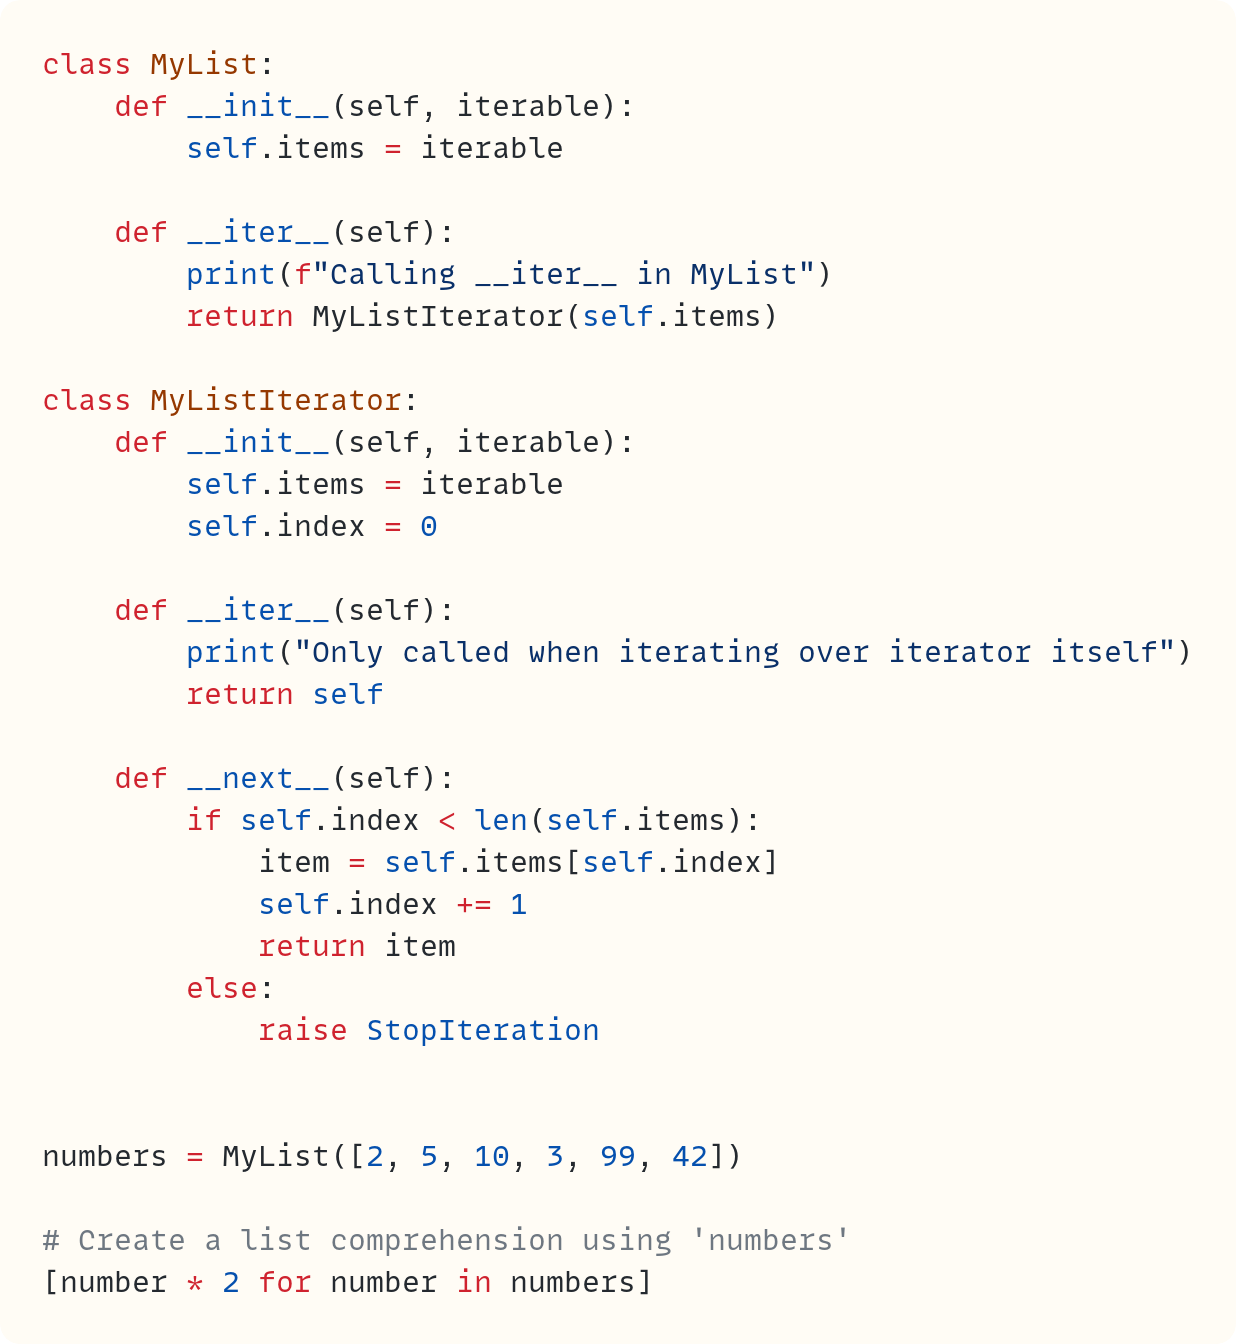 class MyList:     def __init__(self, iterable):         self.items = iterable      def __iter__(self):         print(f"Calling __iter__ in MyList")         return MyListIterator(self.items)  class MyListIterator:     def __init__(self, iterable):         self.items = iterable         self.index = 0      def __iter__(self):         print("Only called when iterating over iterator itself")         return self      def __next__(self):         if self.index < len(self.items):             item = self.items[self.index]             self.index += 1             return item         else:             raise StopIteration   numbers = MyList([2, 5, 10, 3, 99, 42])  # Create a list comprehension using 'numbers' [number * 2 for number in numbers]